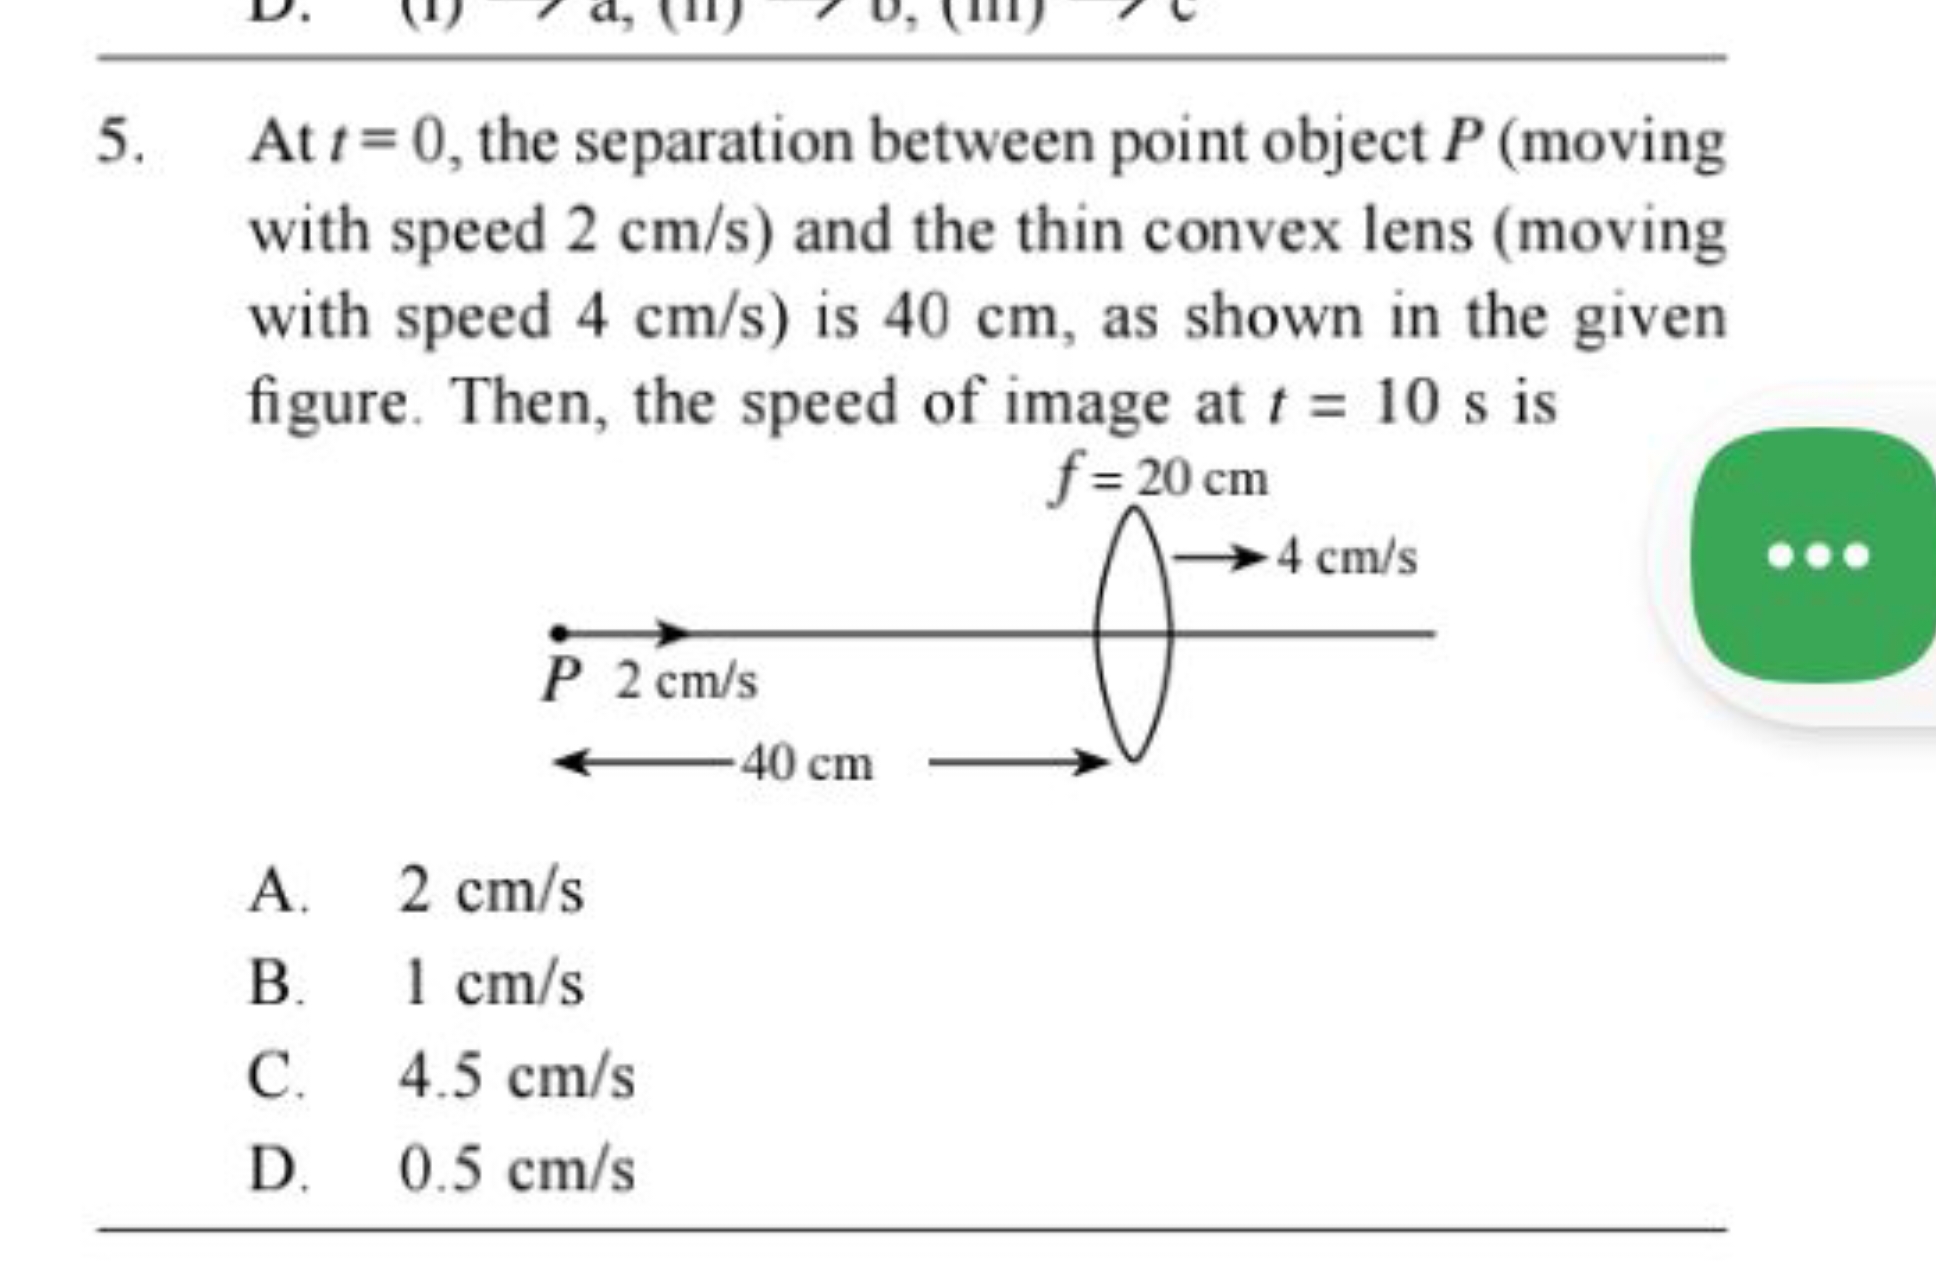 At t=0, the separation between point object P (moving with speed 2 cm/